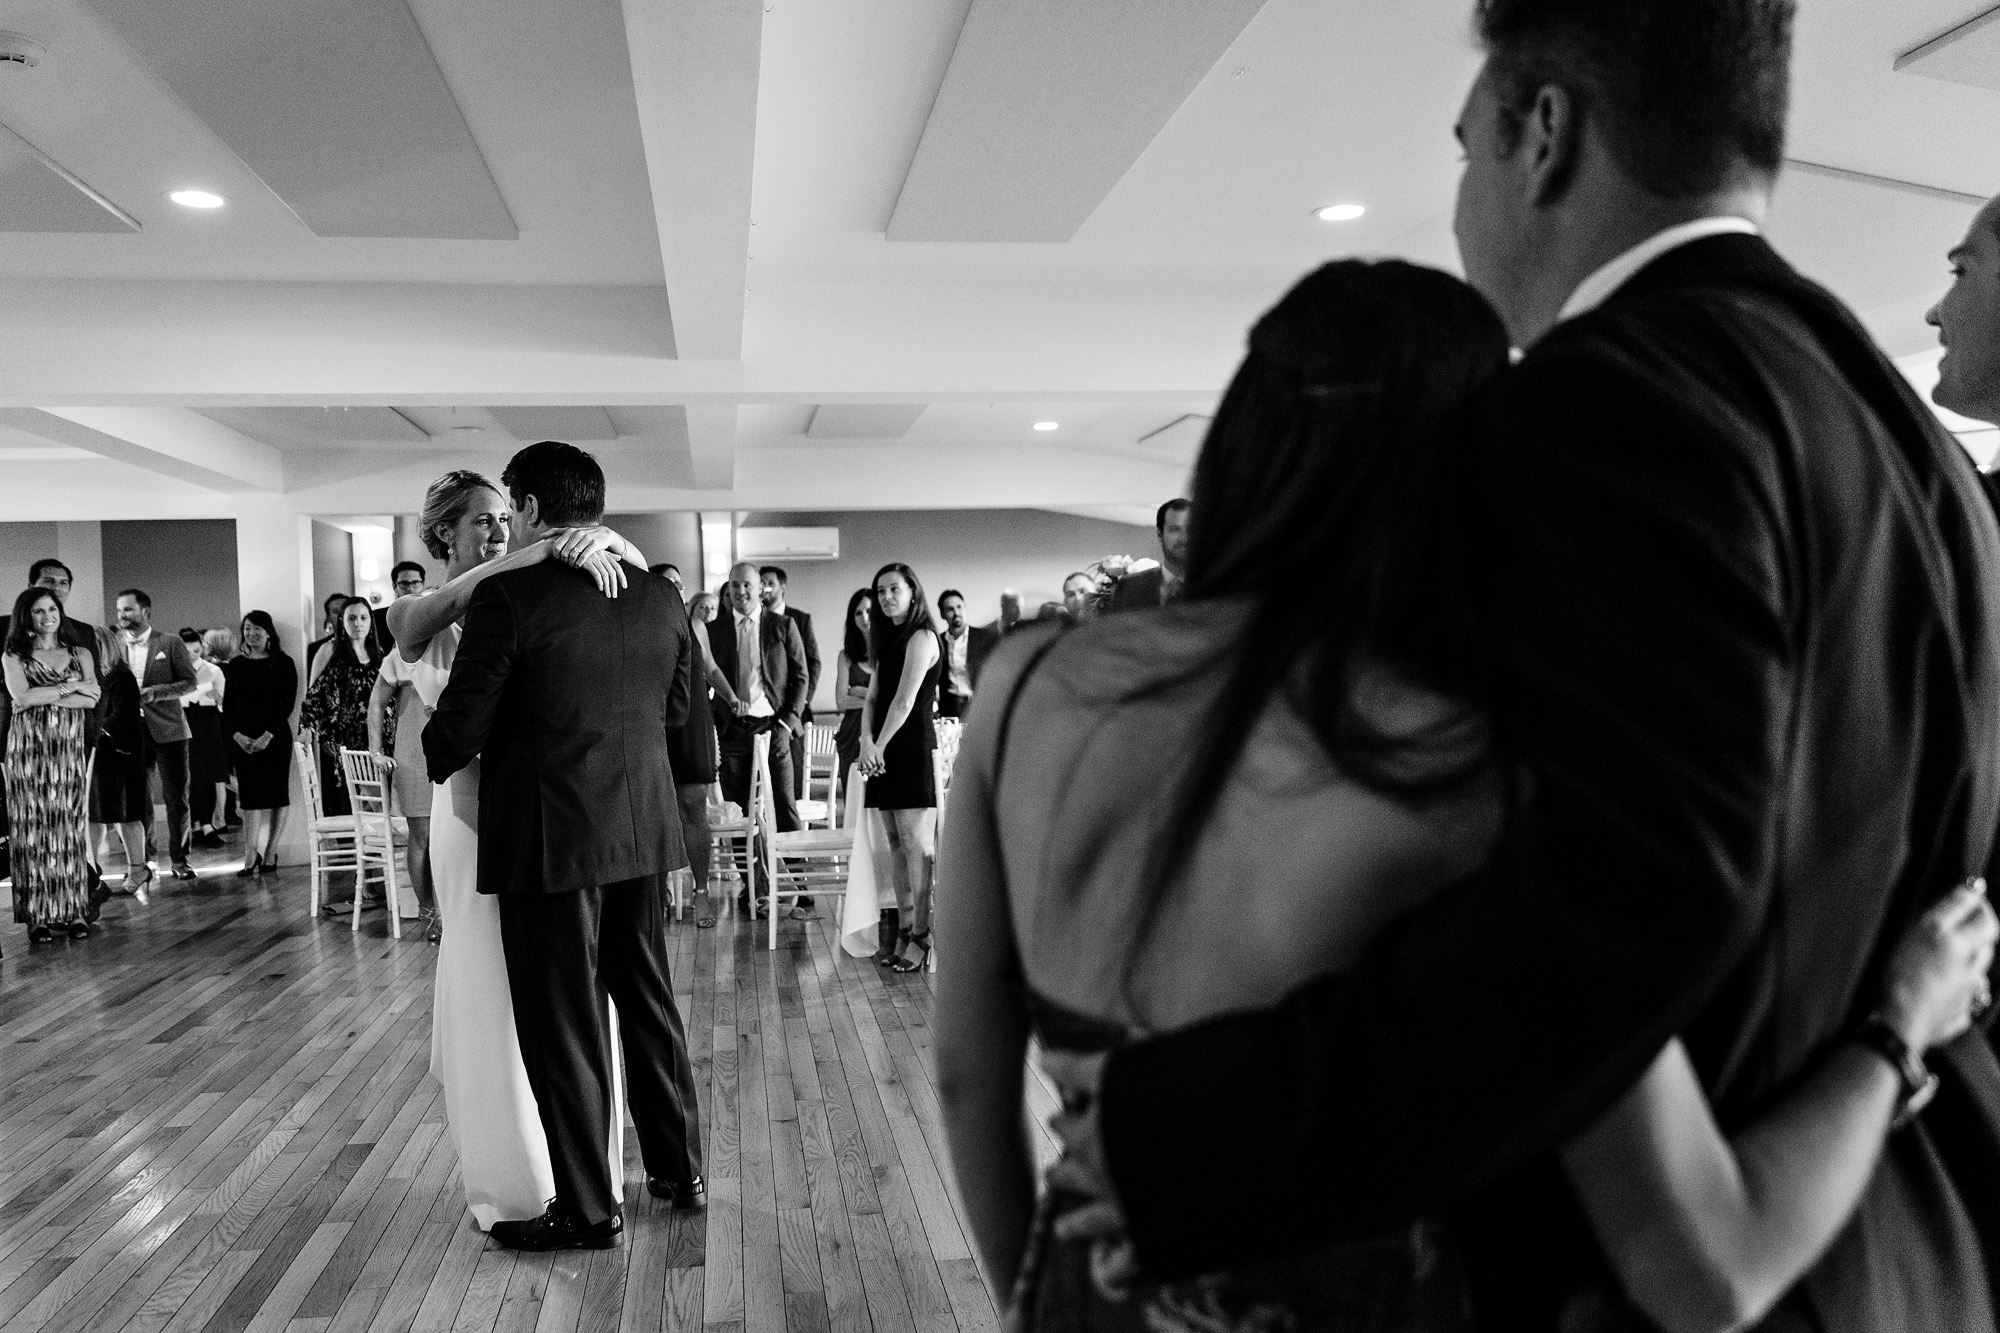 The bride and groom share a first dance at the Newagen Seaside Inn in Southport, Maine